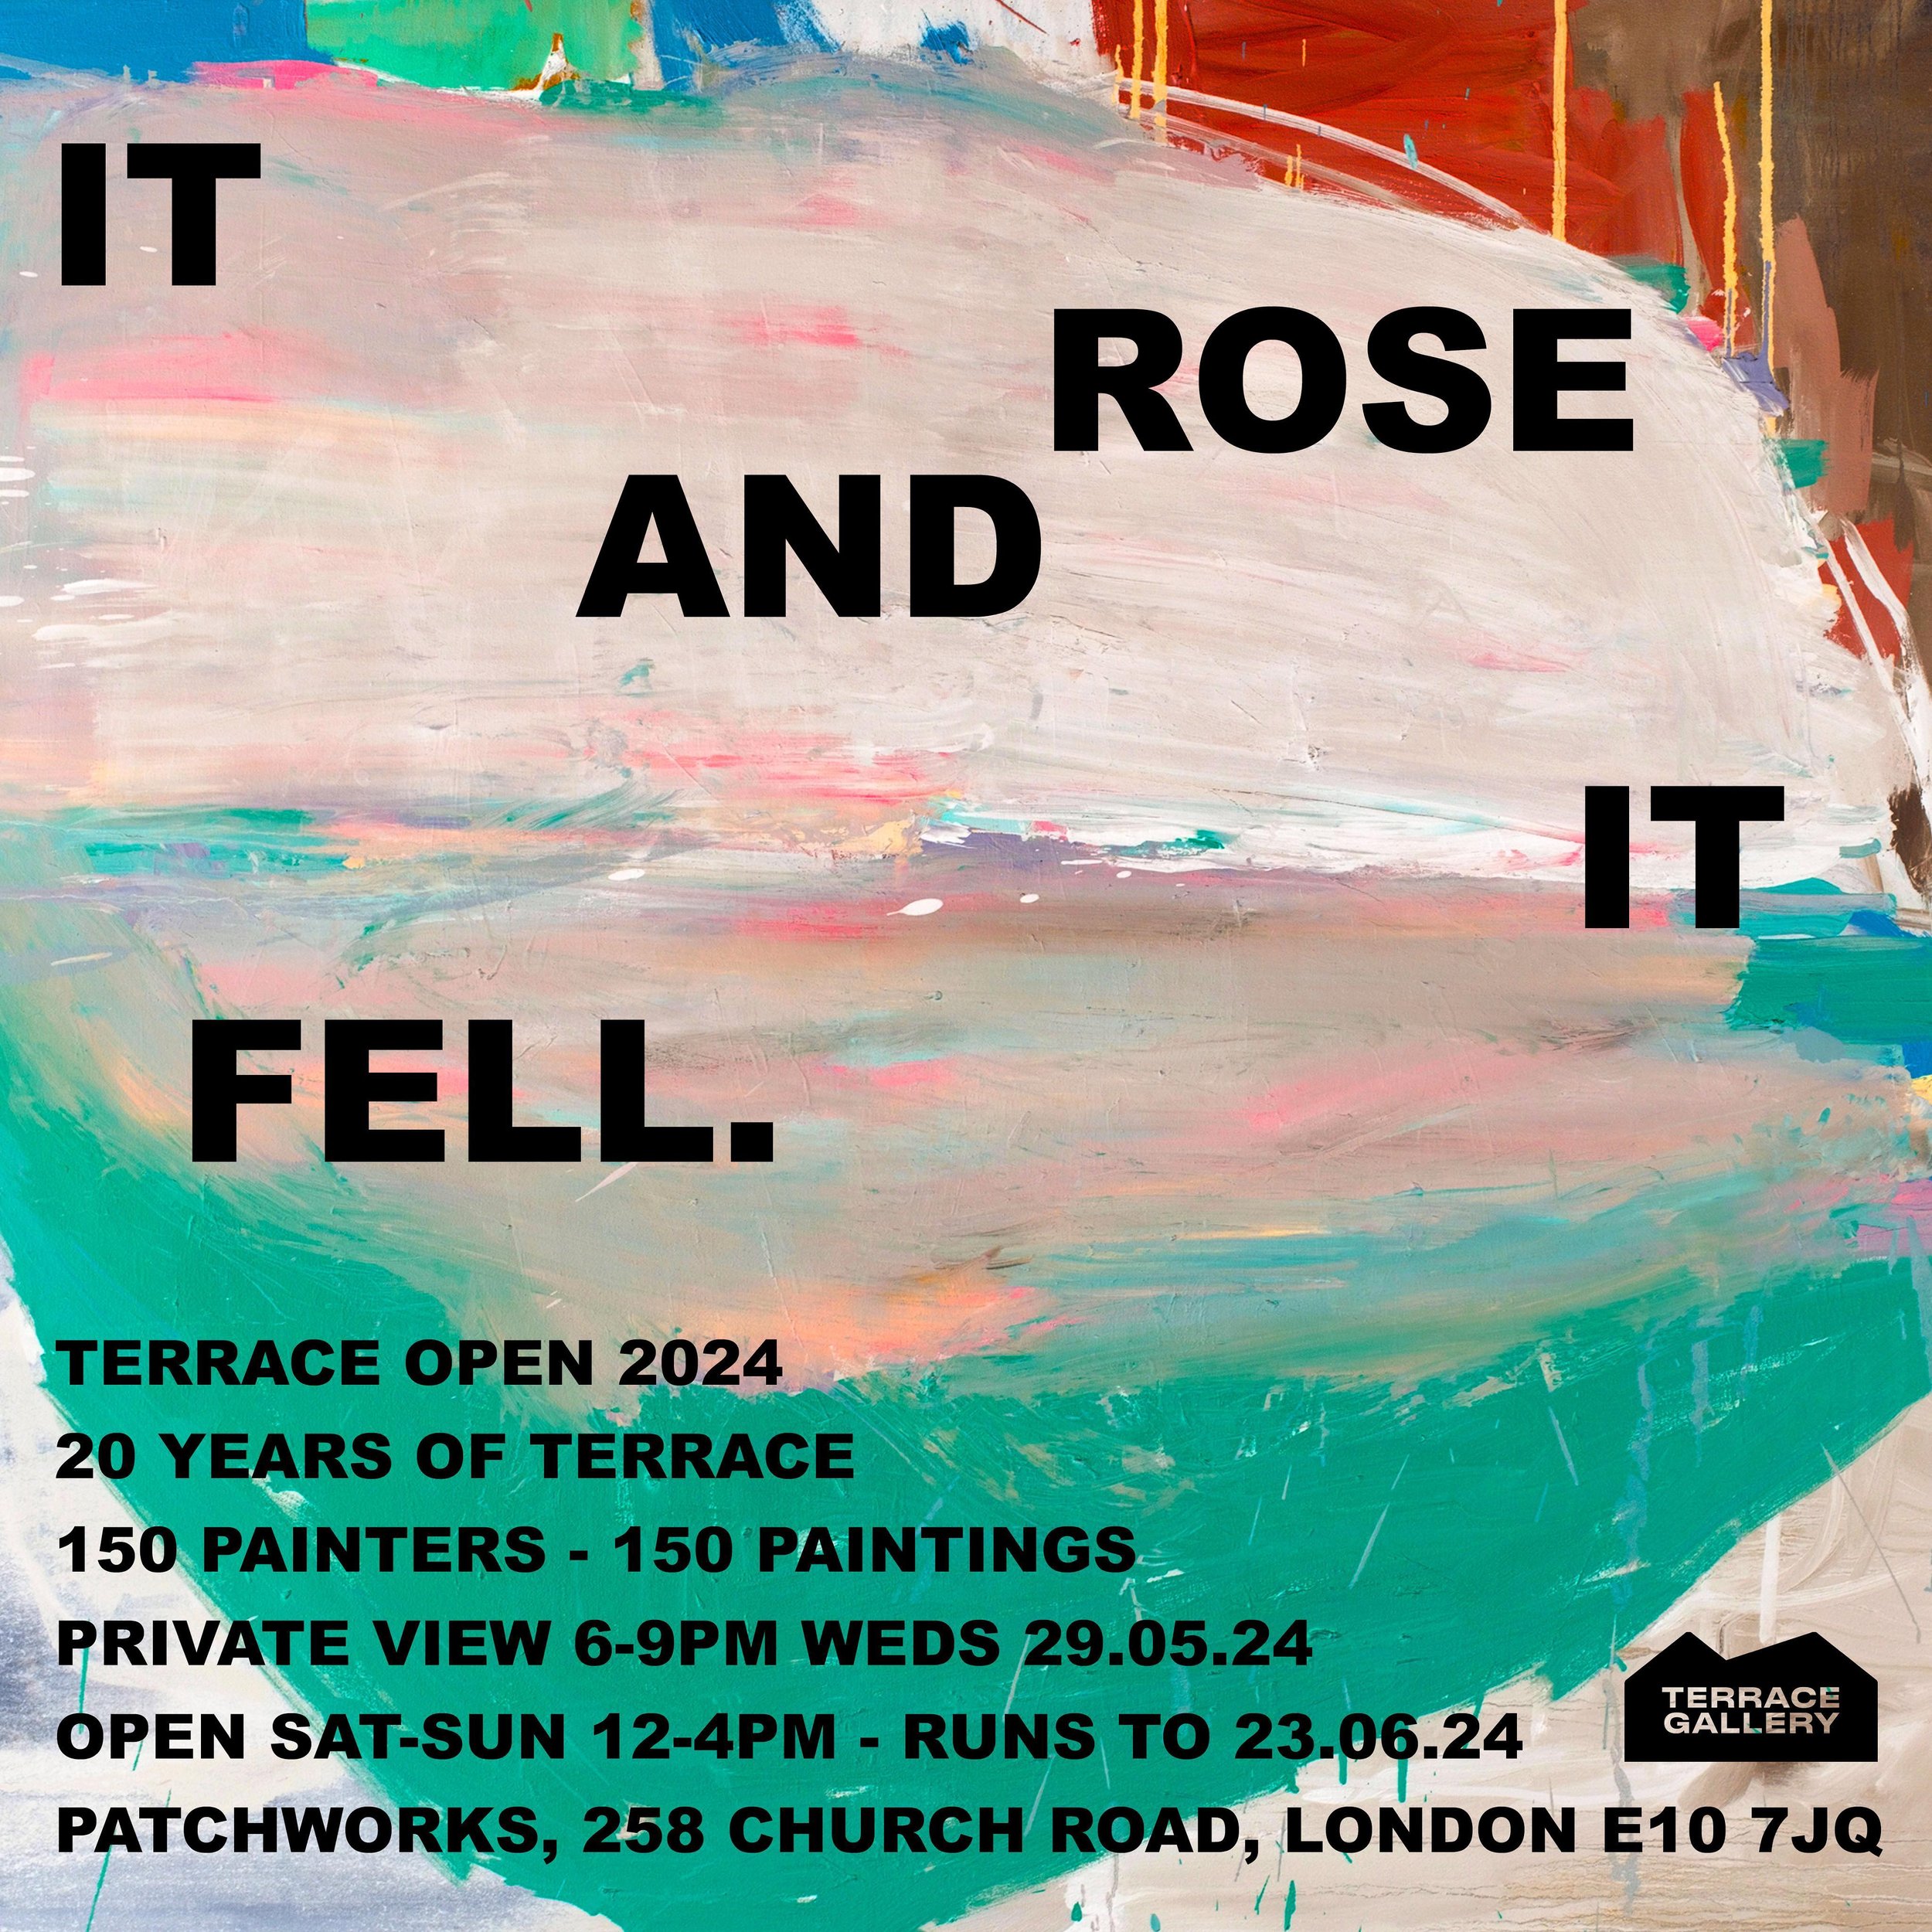 IT ROSE AND IT FELL
TERRACE OPEN 2024
20 YEARS OF @terrace_gallery
150 PAINTERS - 150 PAINTINGS
PRIVATE VIEW 6-9PM WEDS 29.05.24
OPEN SAT-SUN 12-4PM - RUNS TO 23.06.24
PATCHWORKS @patchworks.xyz, 258 CHURCH ROAD, LONDON E10 7JQ
ALL WELCOME.

ARTISTS
